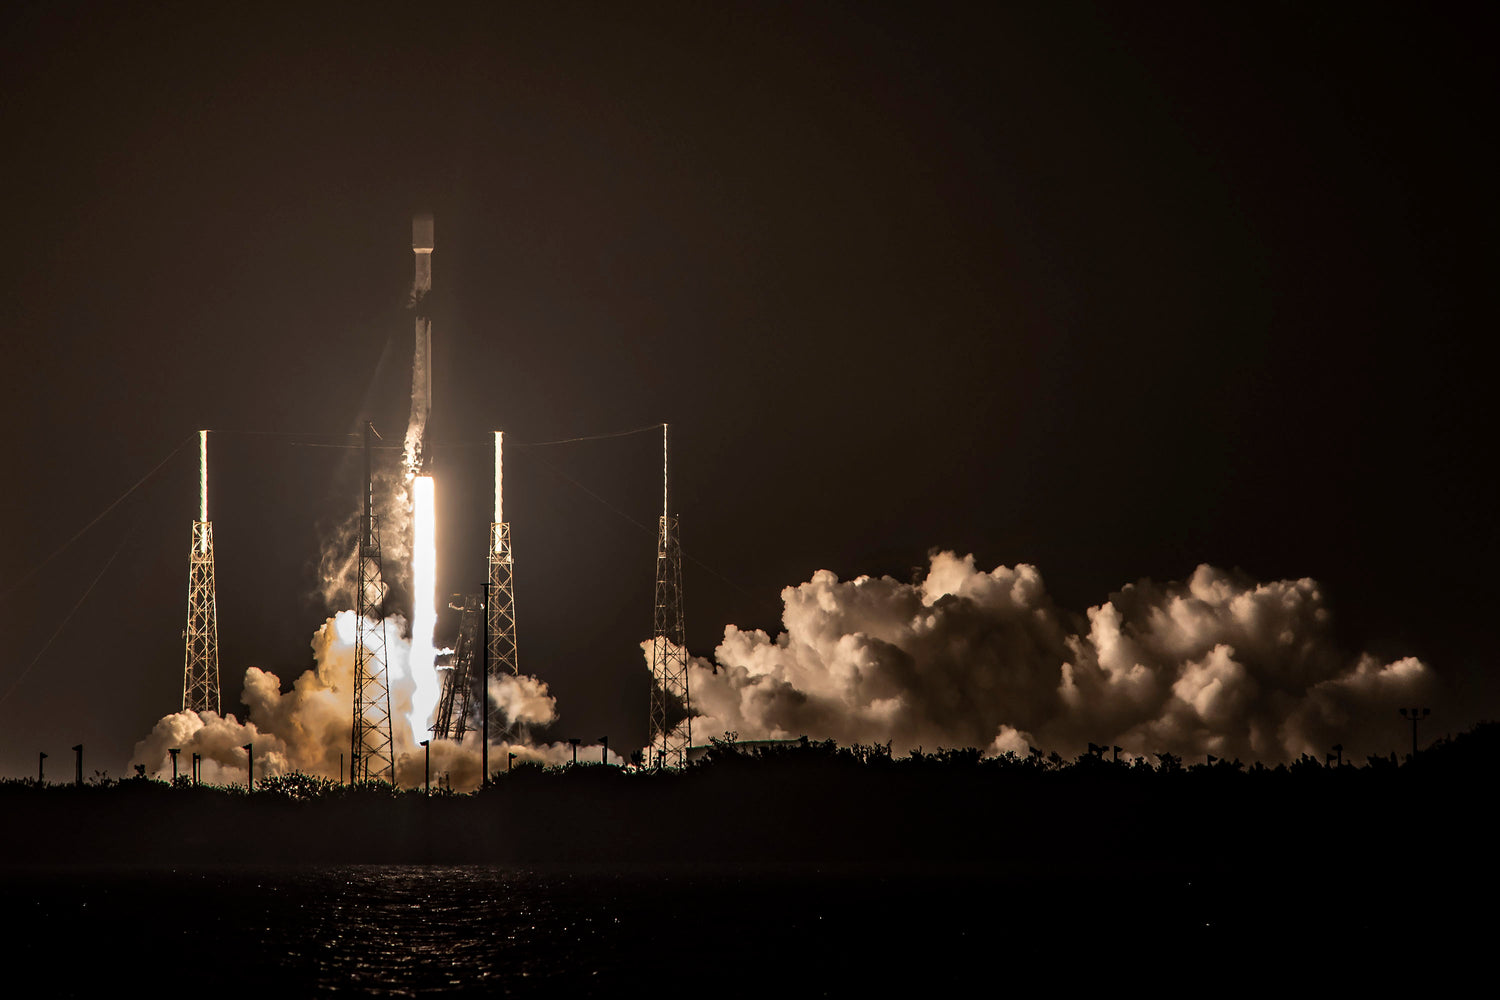 SpaceX launches Falcon 9 for the seventh time to deploy Starlink satellites